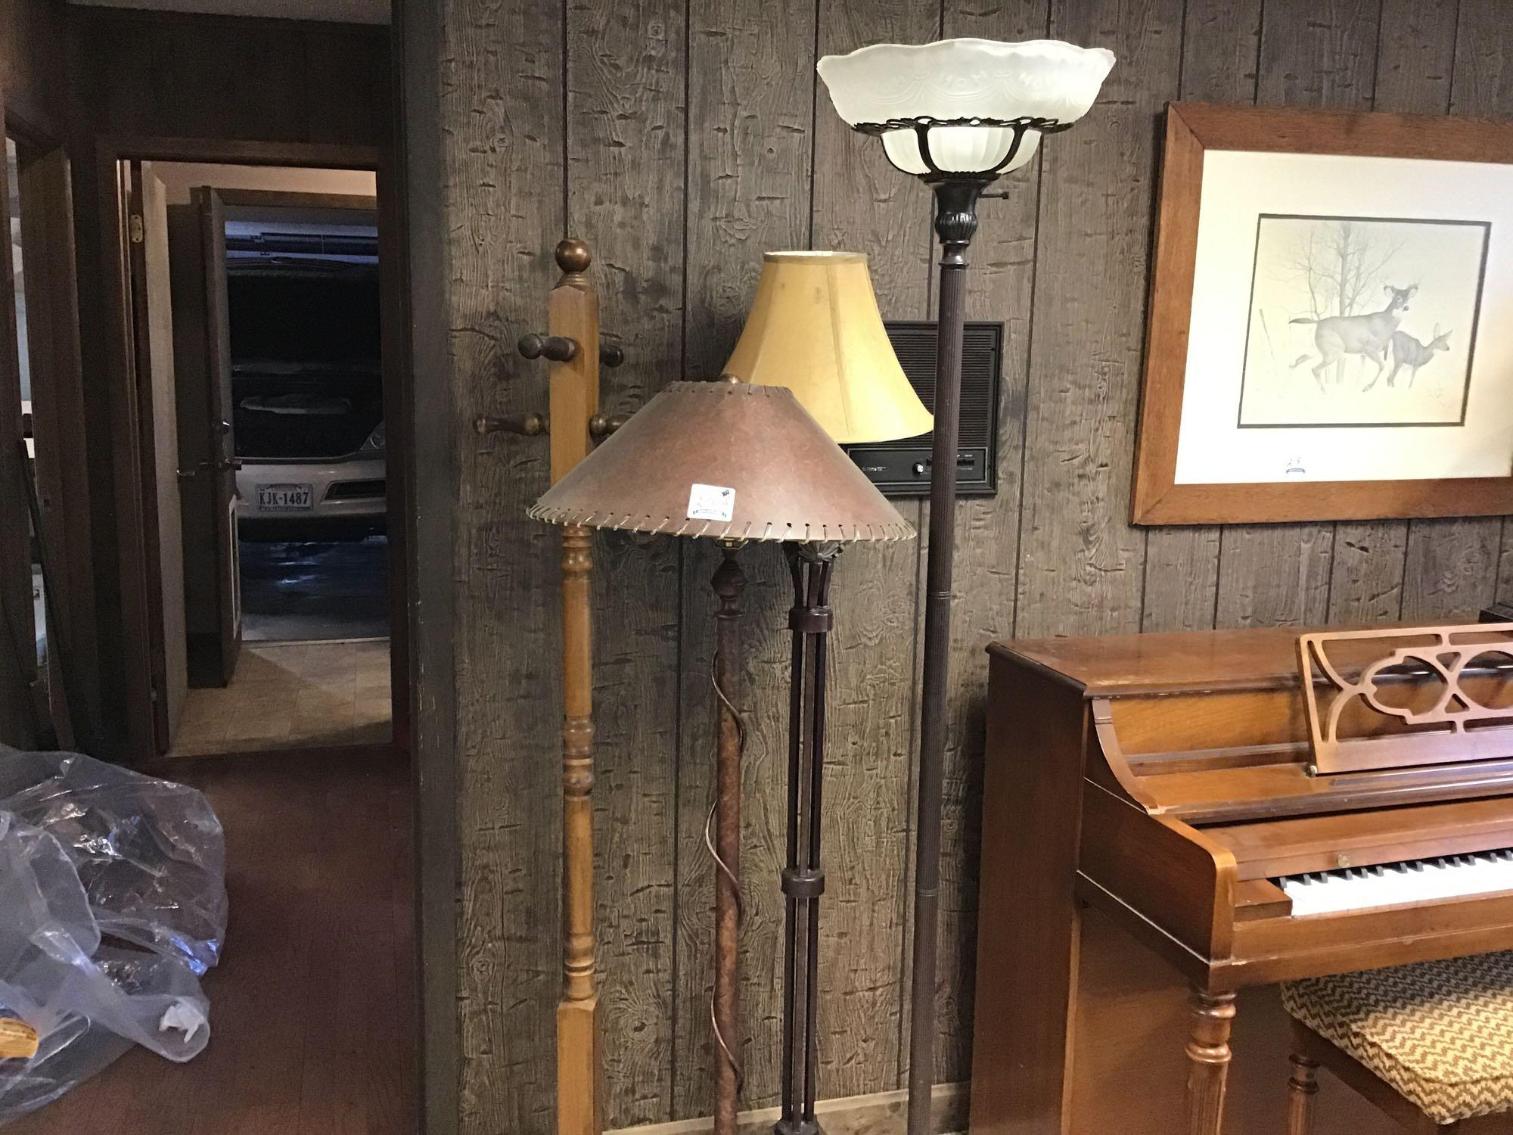 Image for Floor Lamps and Coat Rack